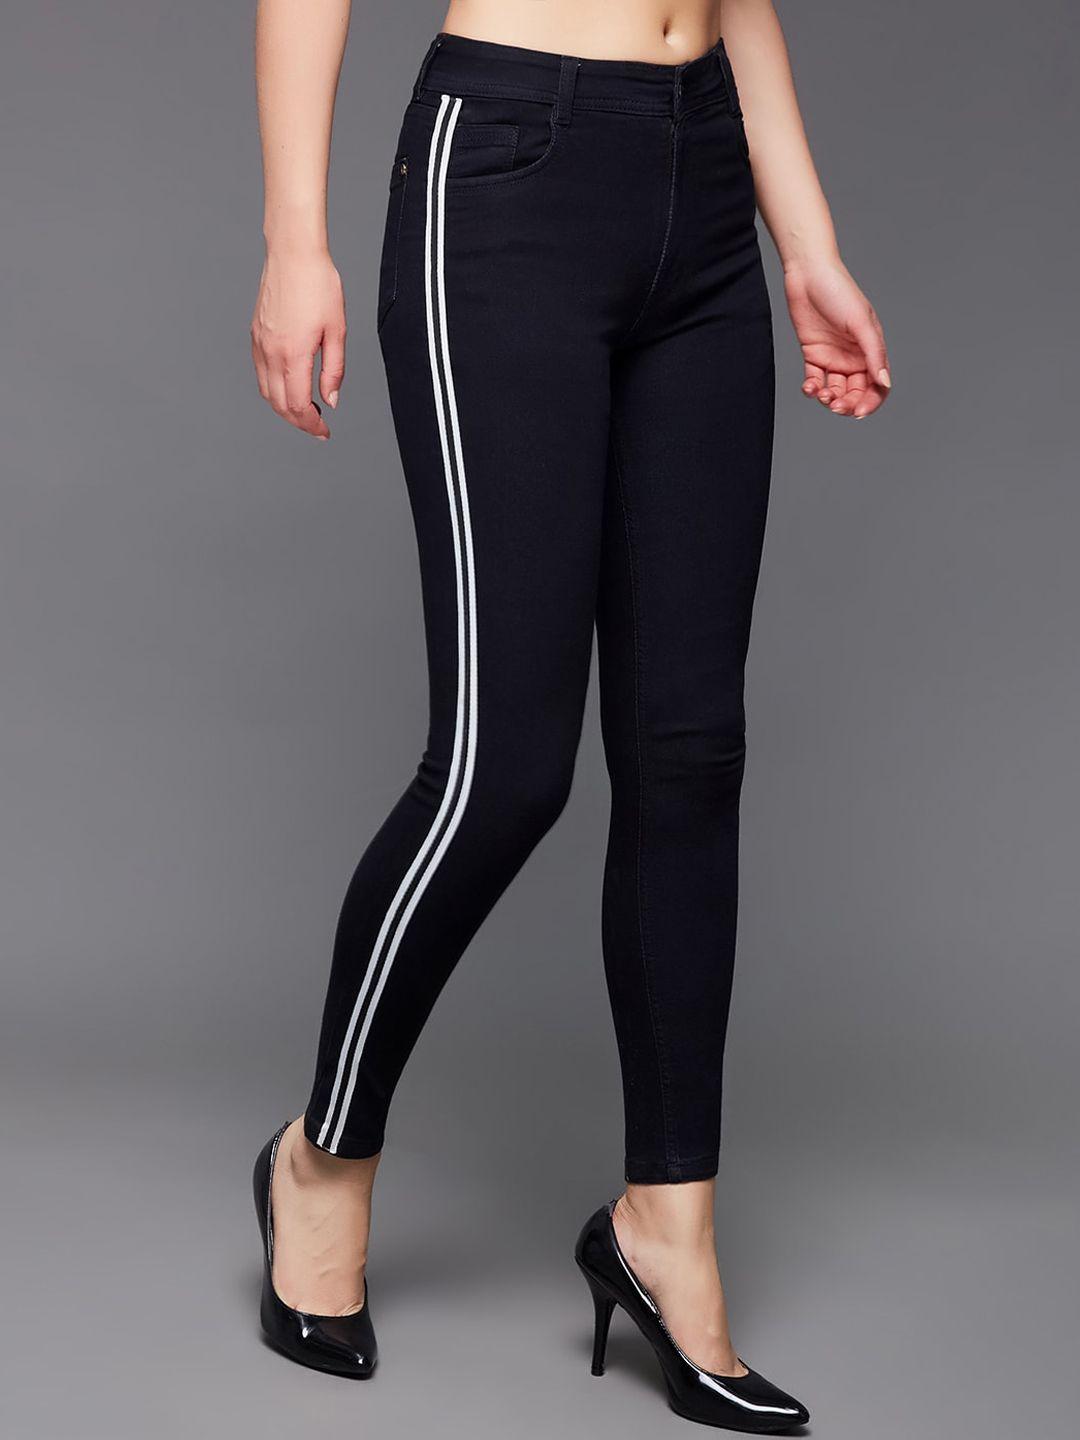 miss-chase-women-black-slim-fit-side-stripes-clean-look-stretchable-jeans